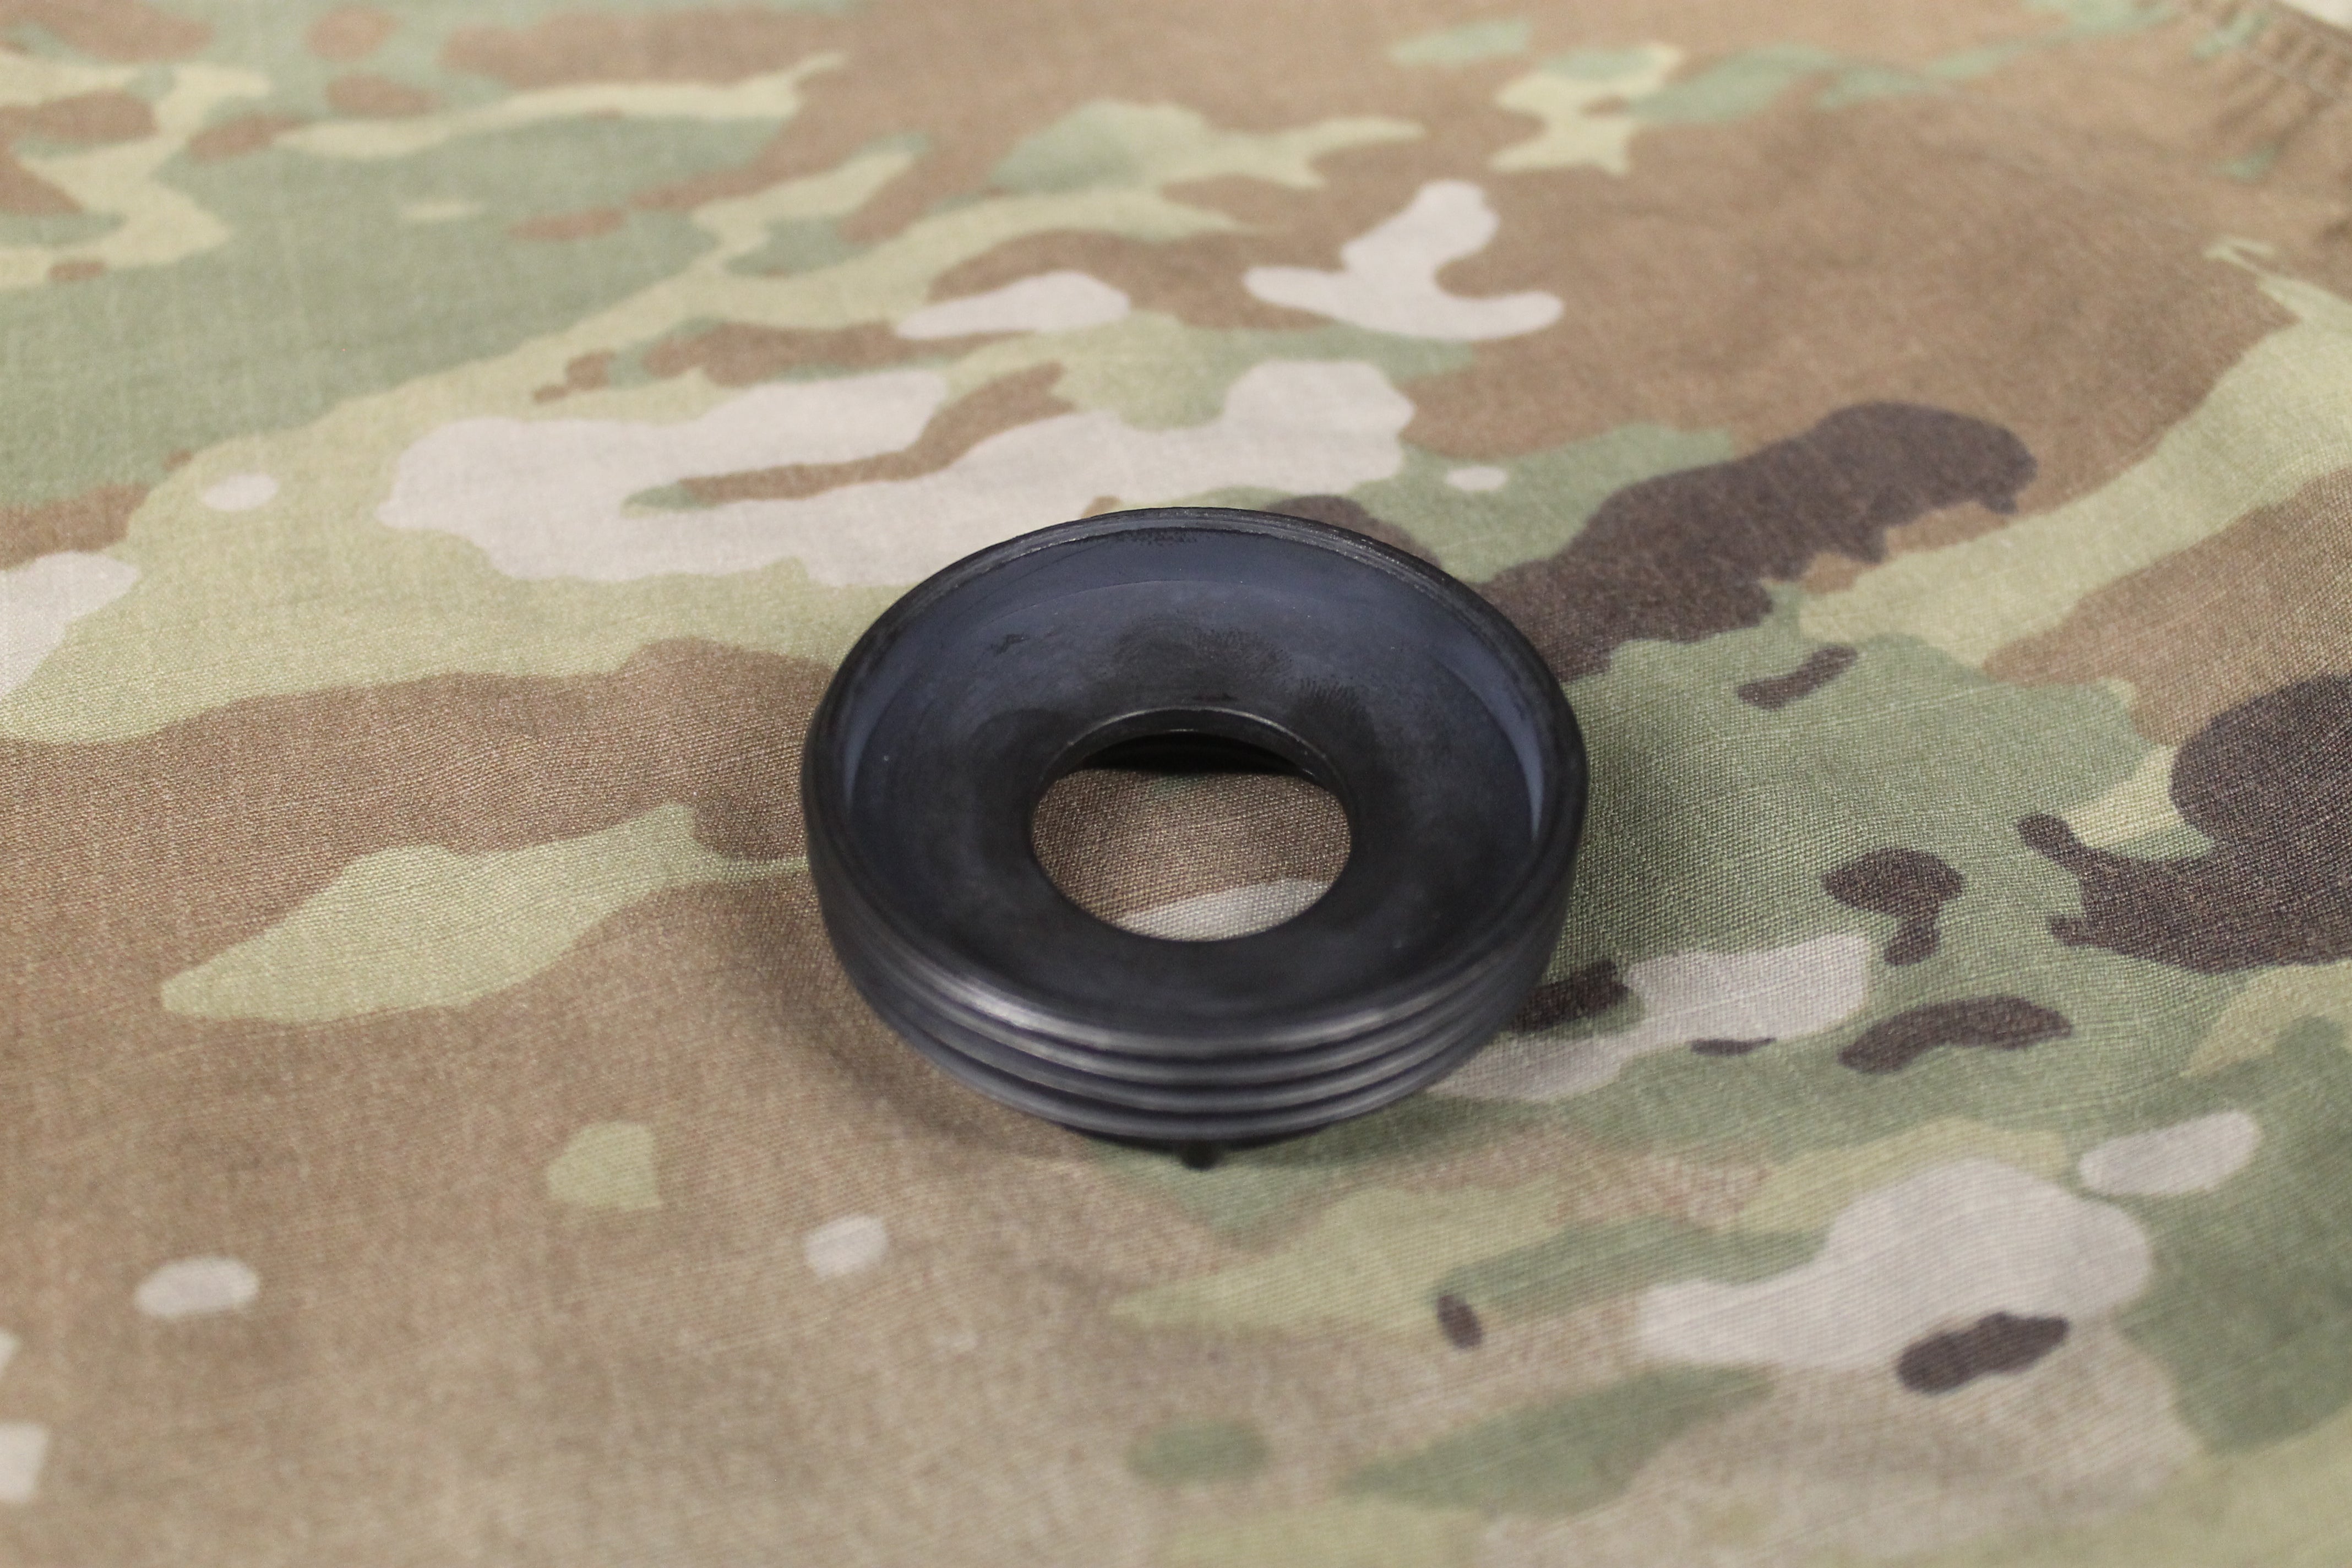 40mm gas mask filter adapter